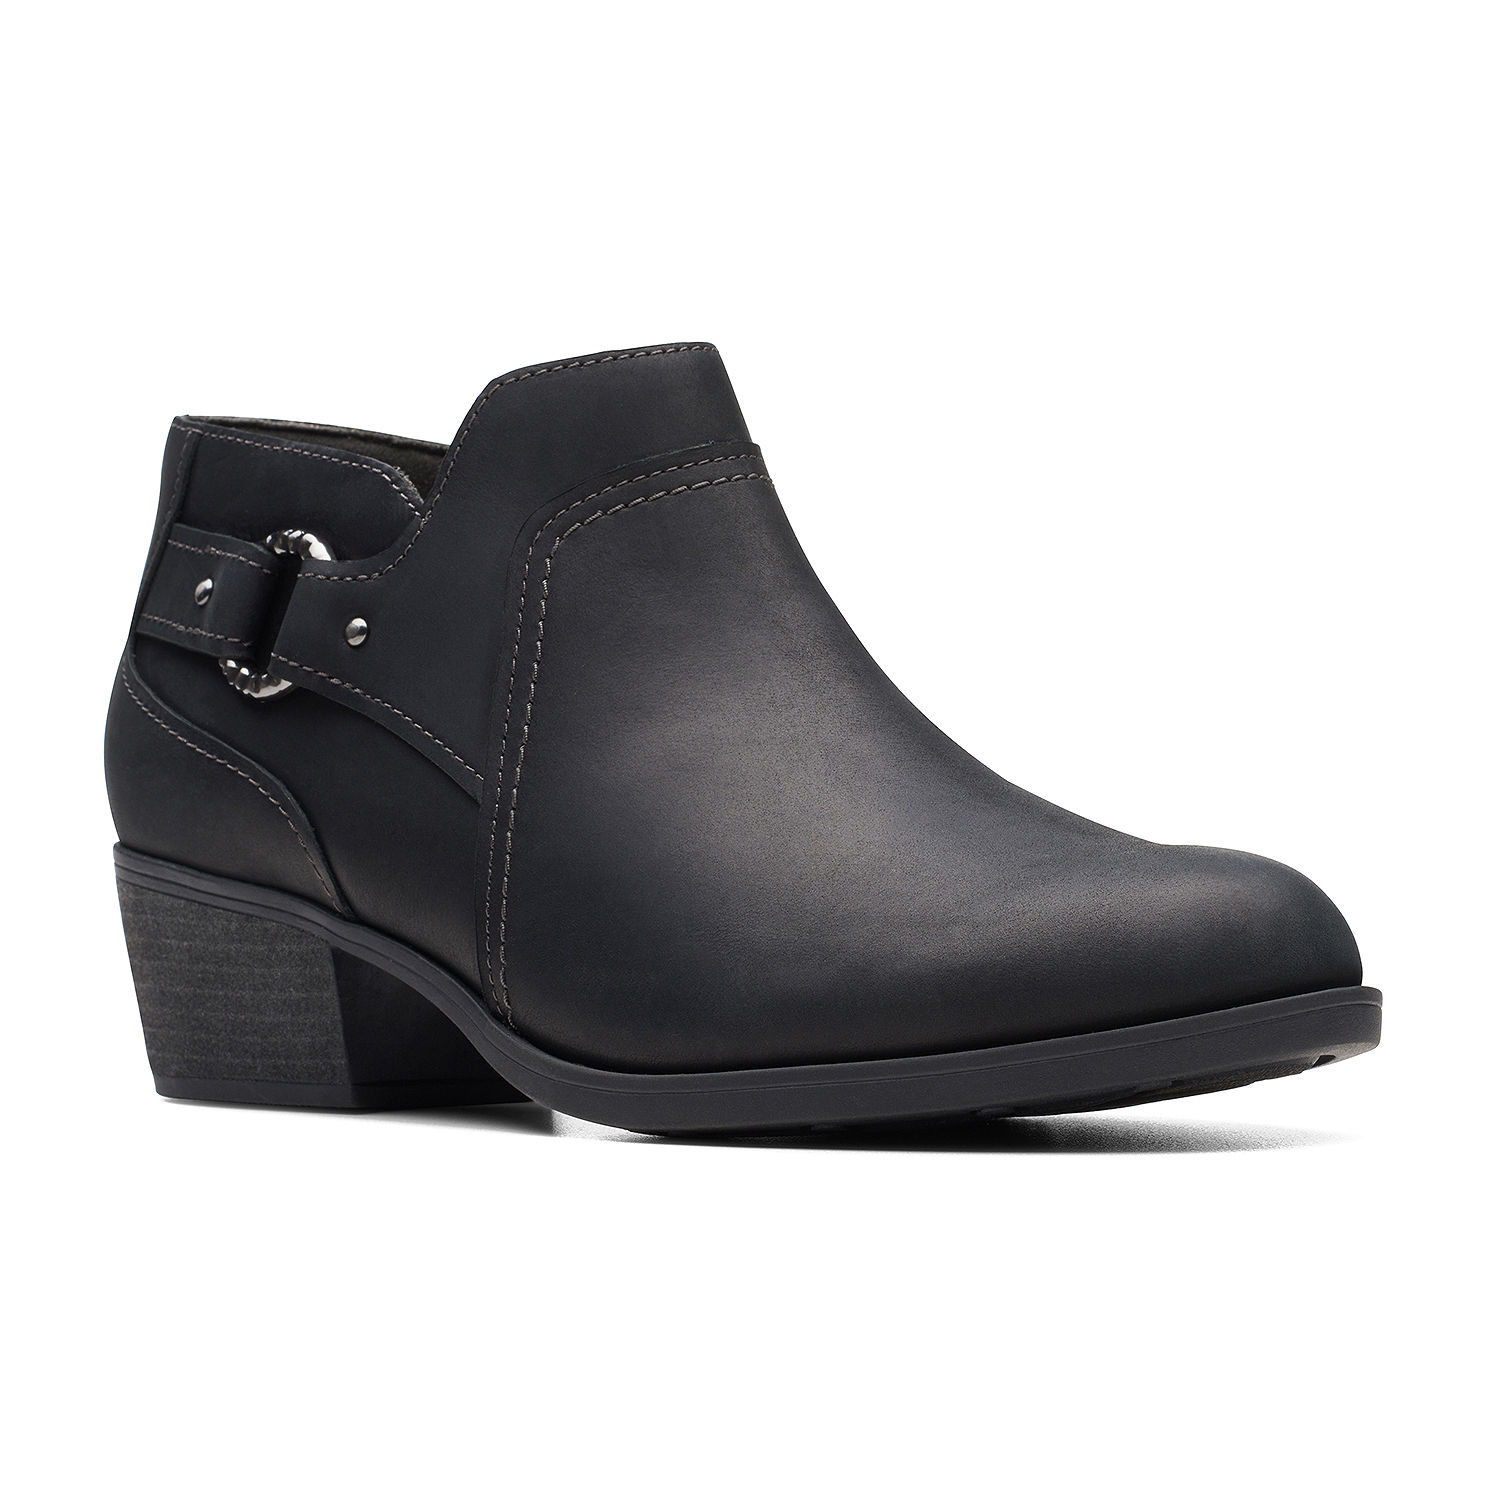 Clarks Womens Charlten Grace Stacked Heel Booties - JCPenney